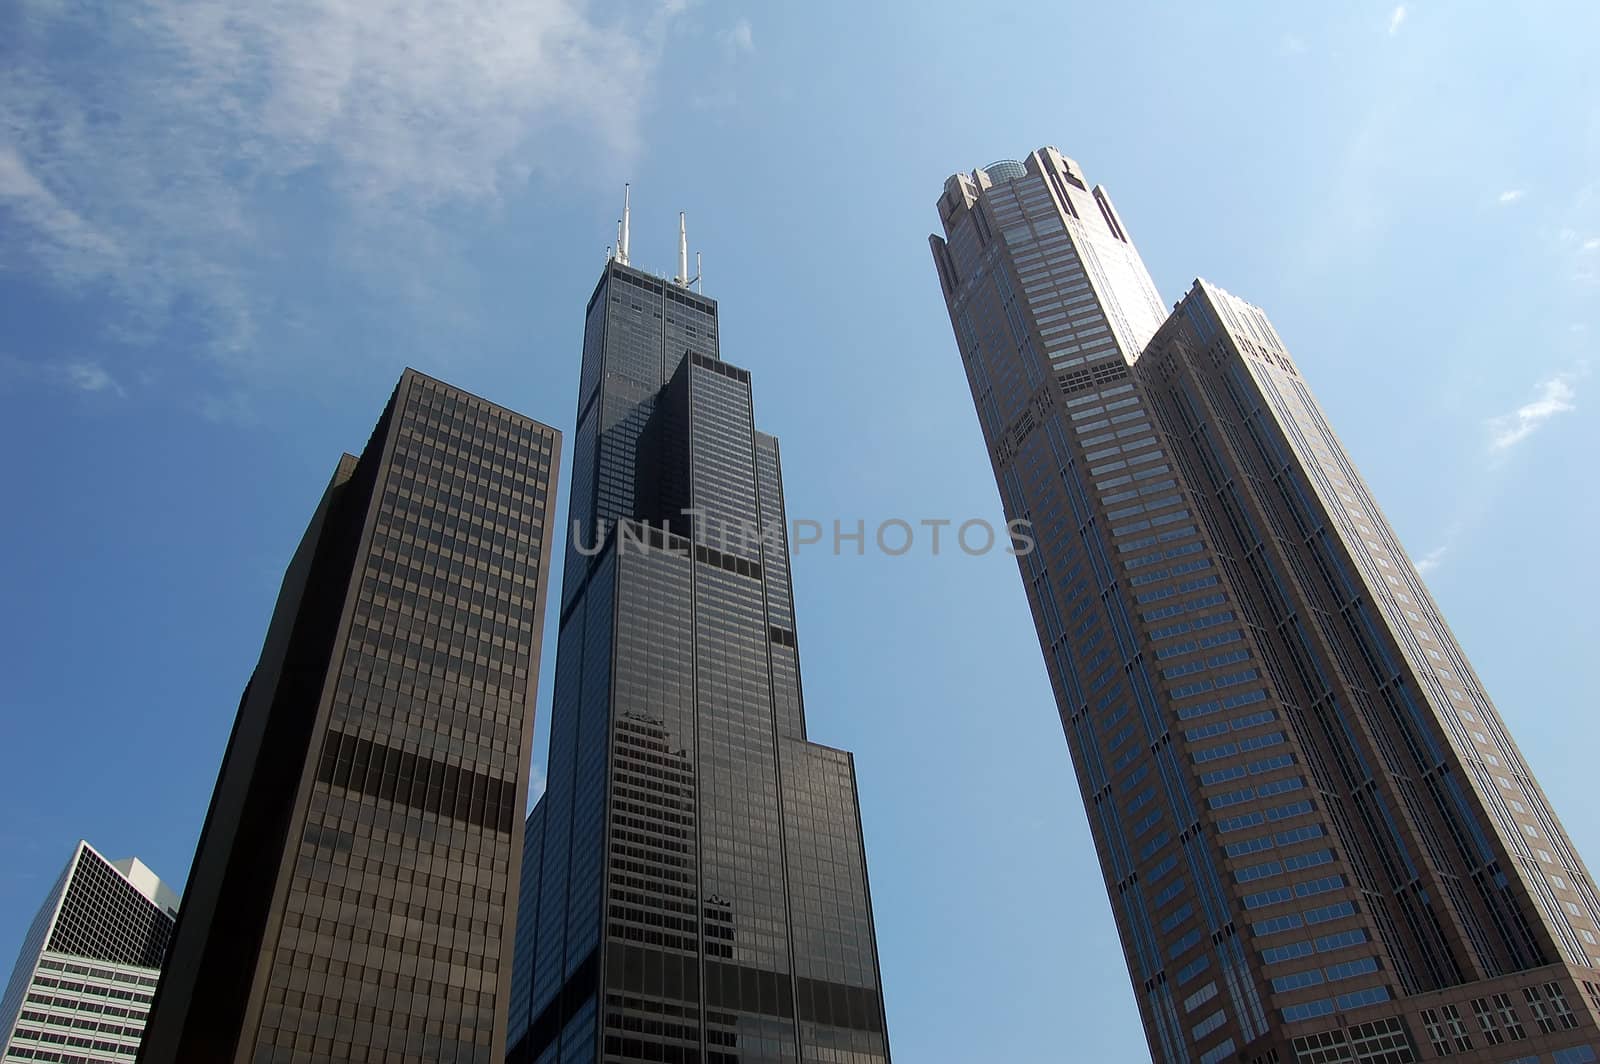 Picture of several very modern skyscrapers in Chicago